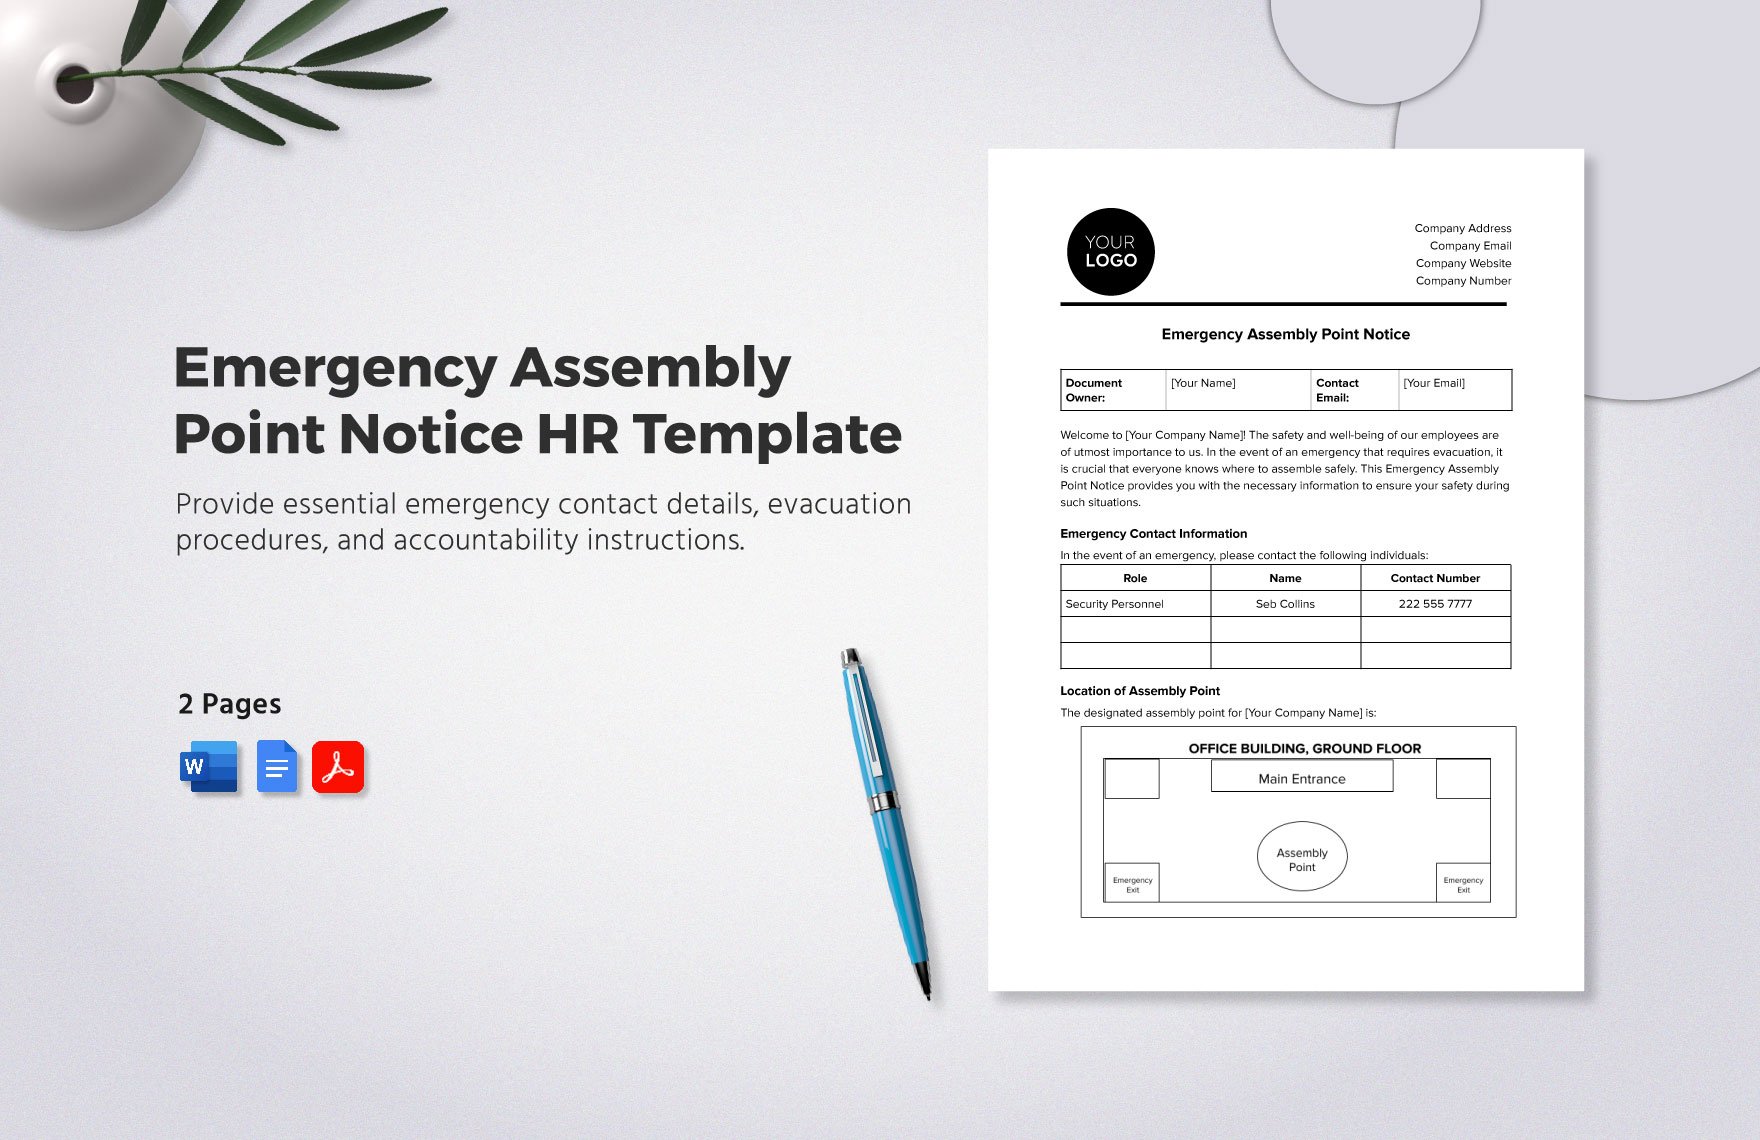 Emergency Assembly Point Notice HR Template